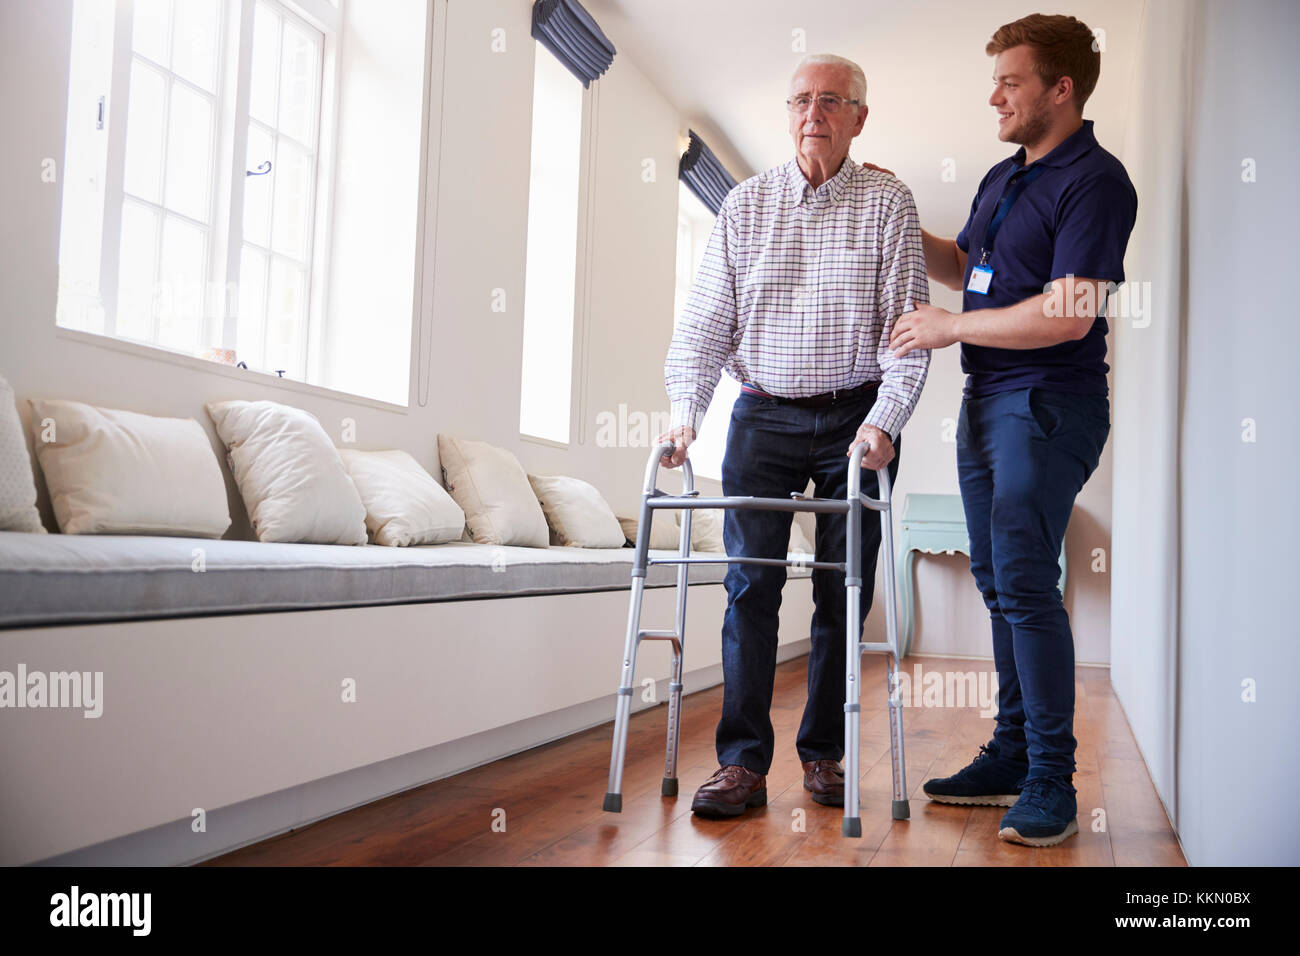 Senior man using a walking frame with male nurse at home Stock Photo